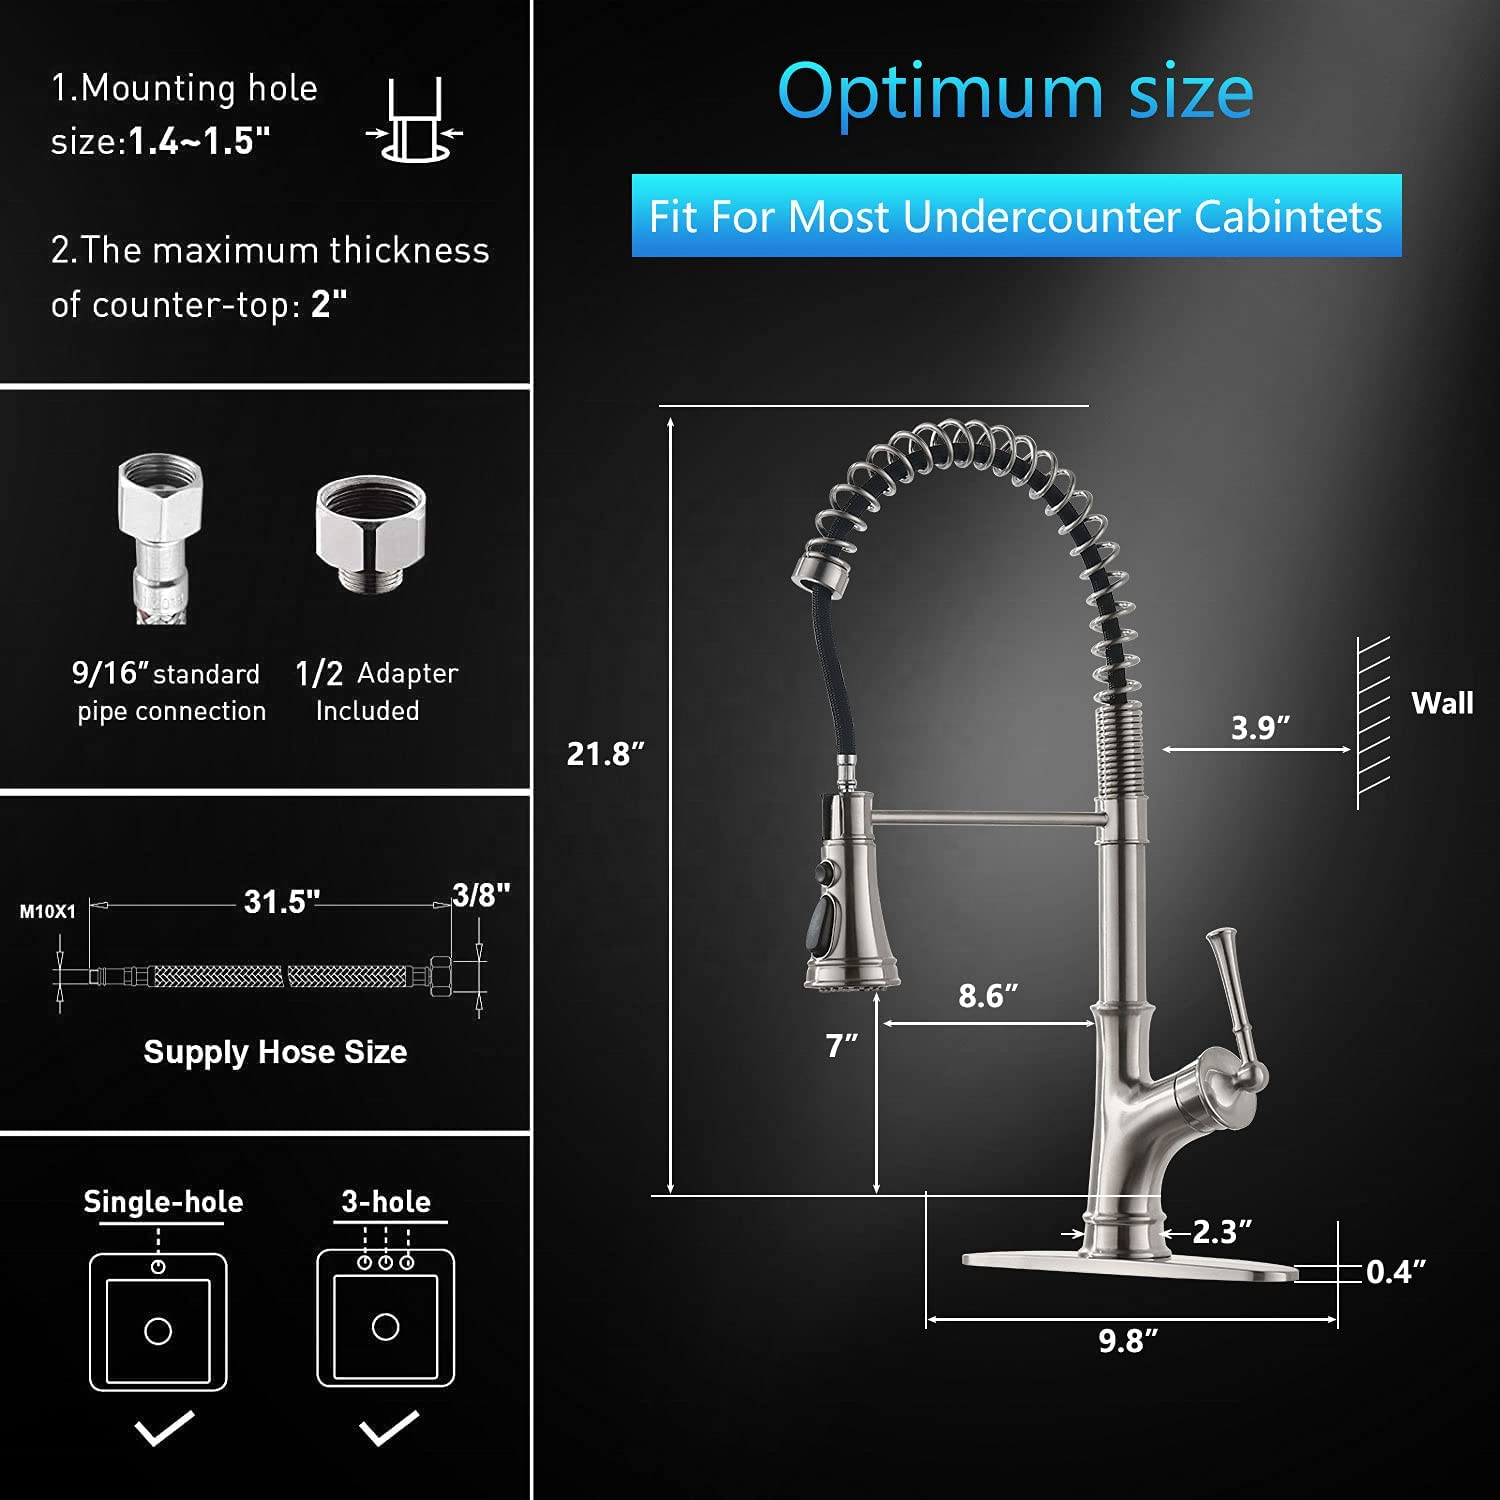 Spring Loaded Kitchen Sink Mixer Tap Faucets Brushed Nickle Faucet With Base Plate Kitchen Sink Faucets